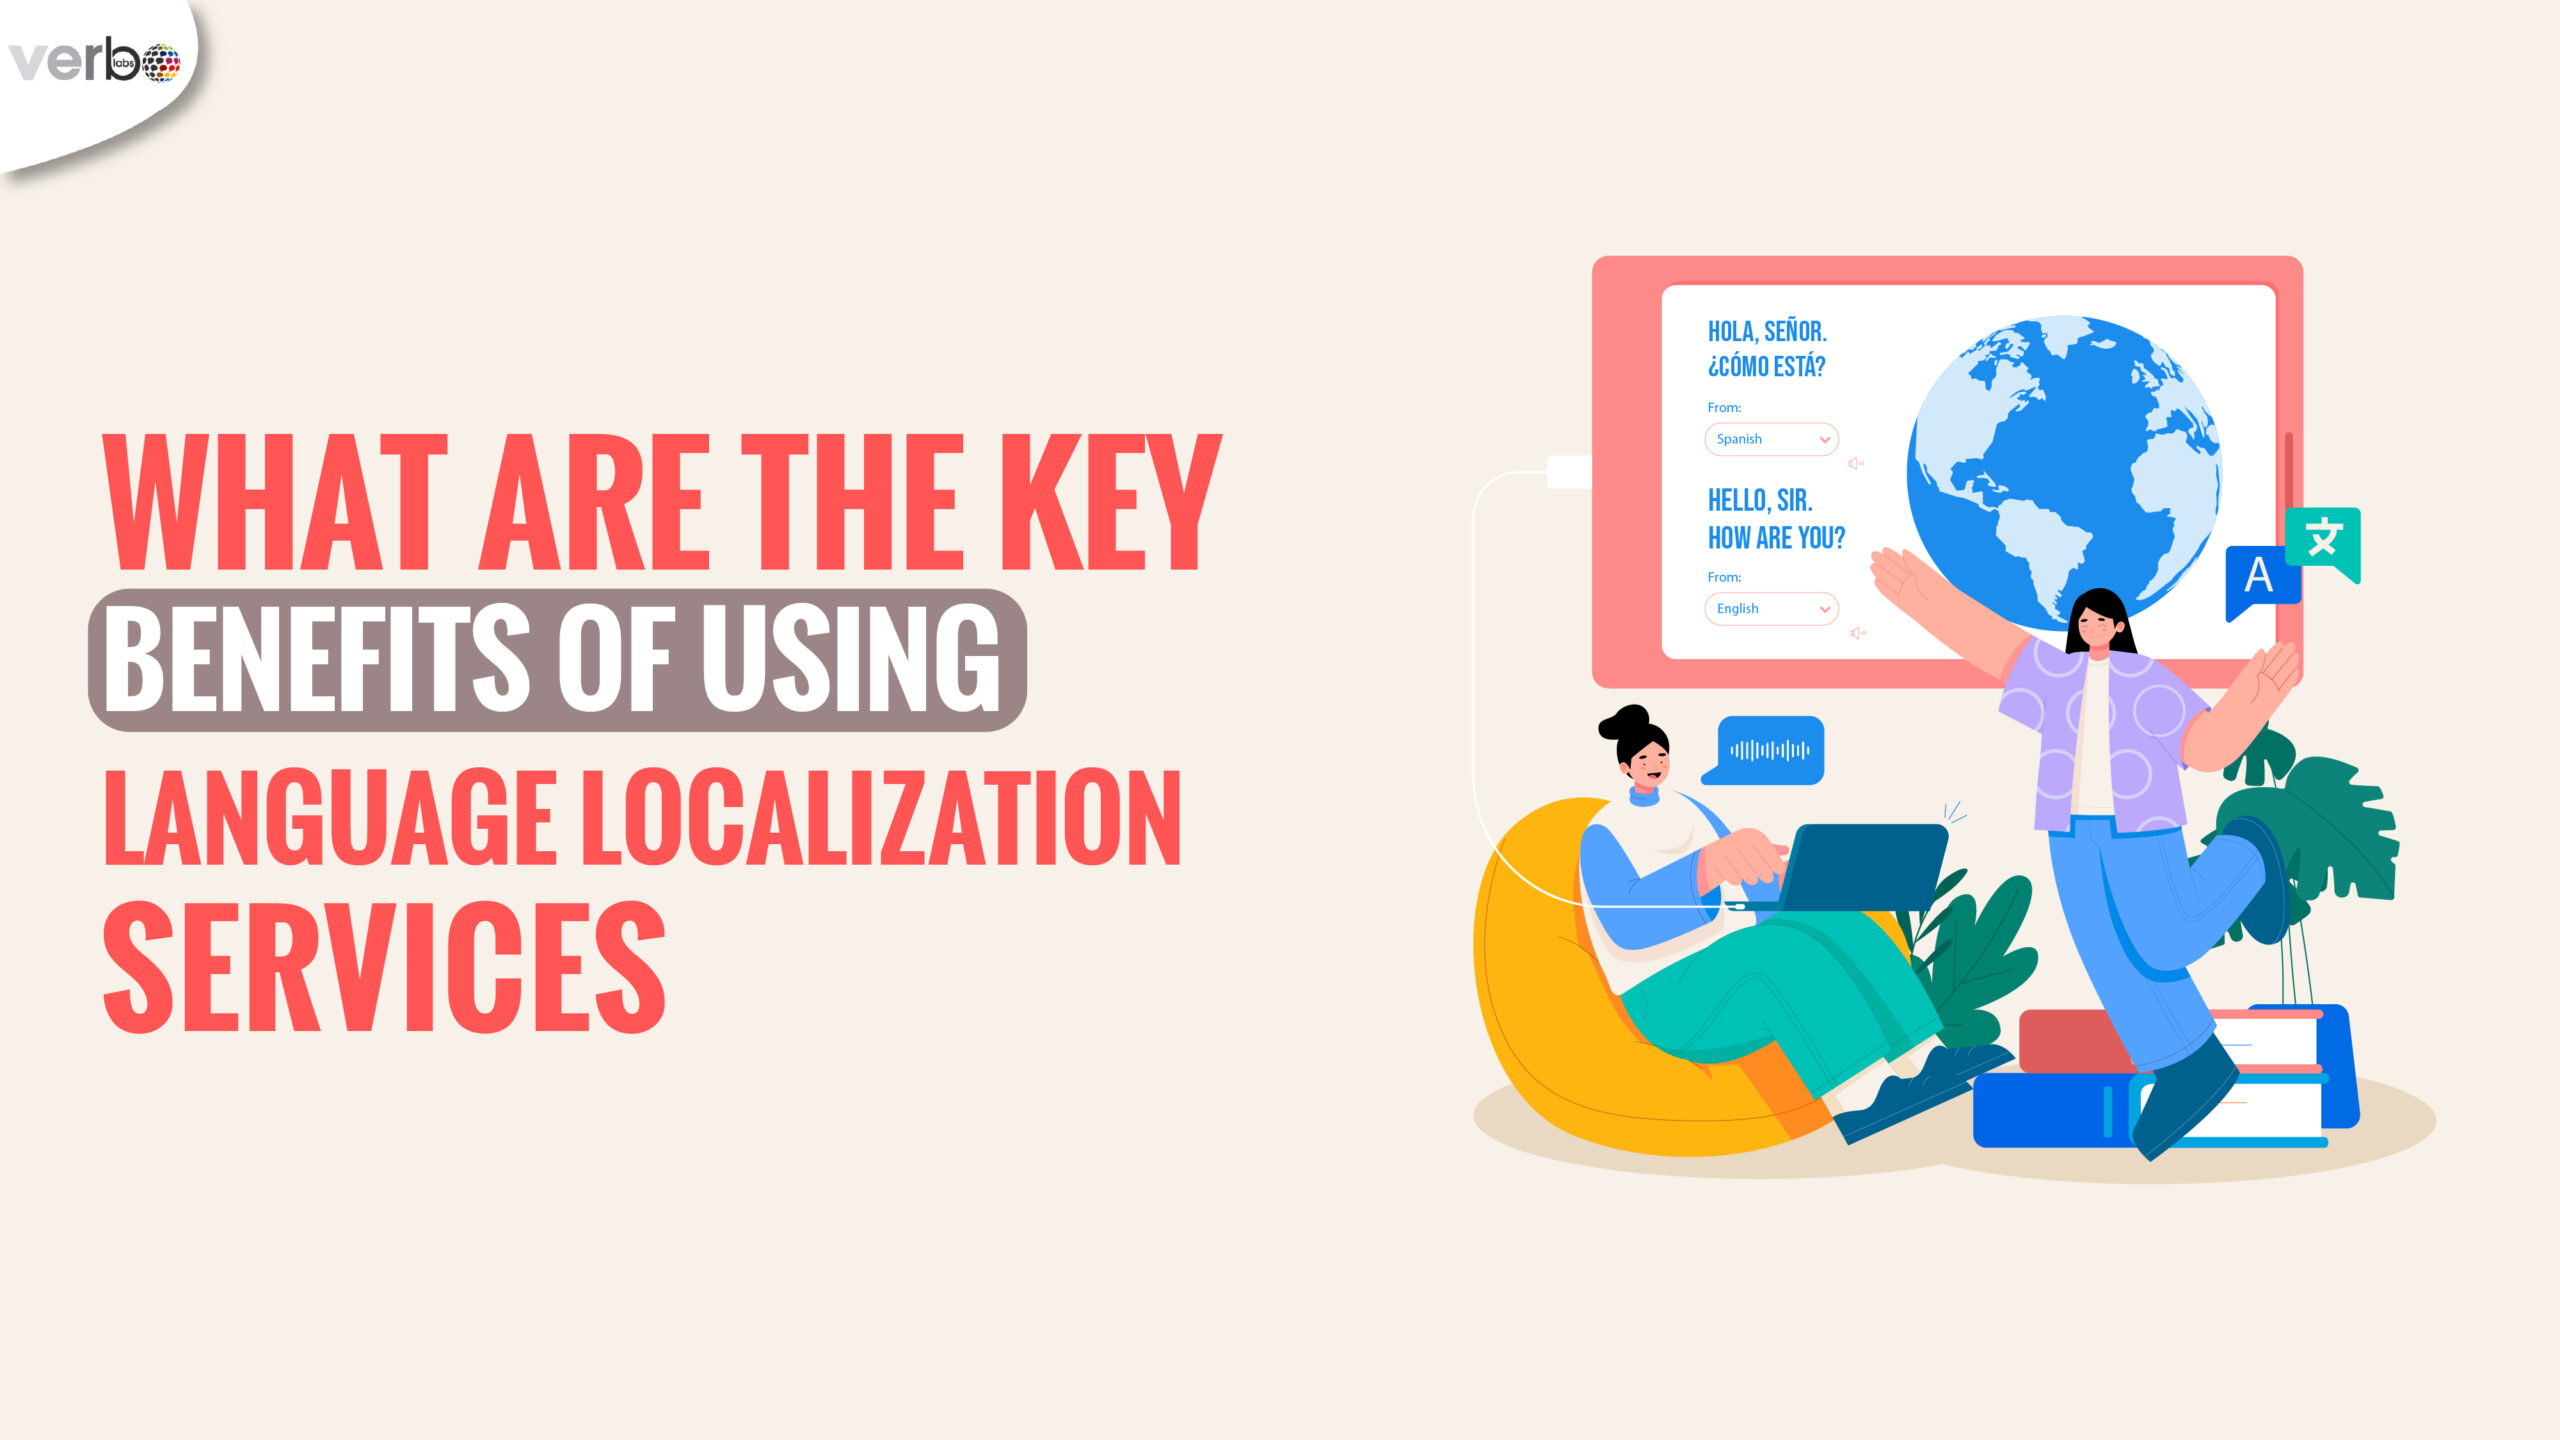 What are the key benefits of using language localization services